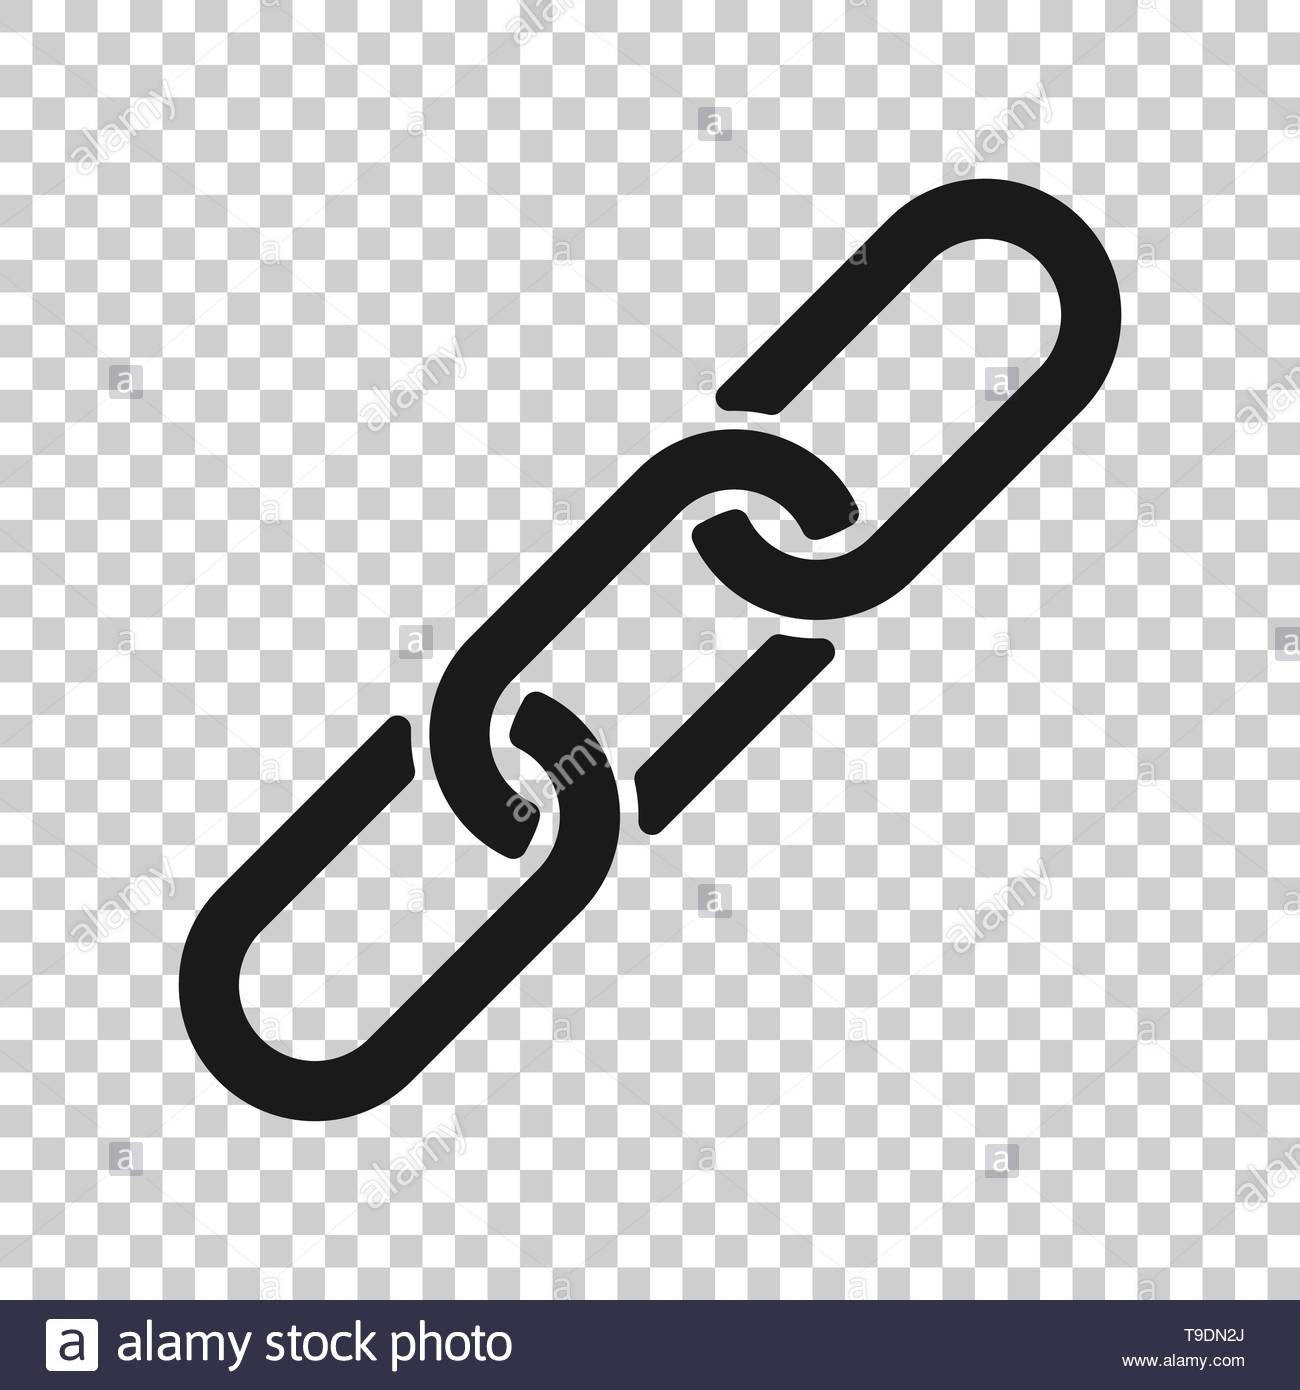 Chain Sign Icon In Transparent Style Link Vector Illustration On